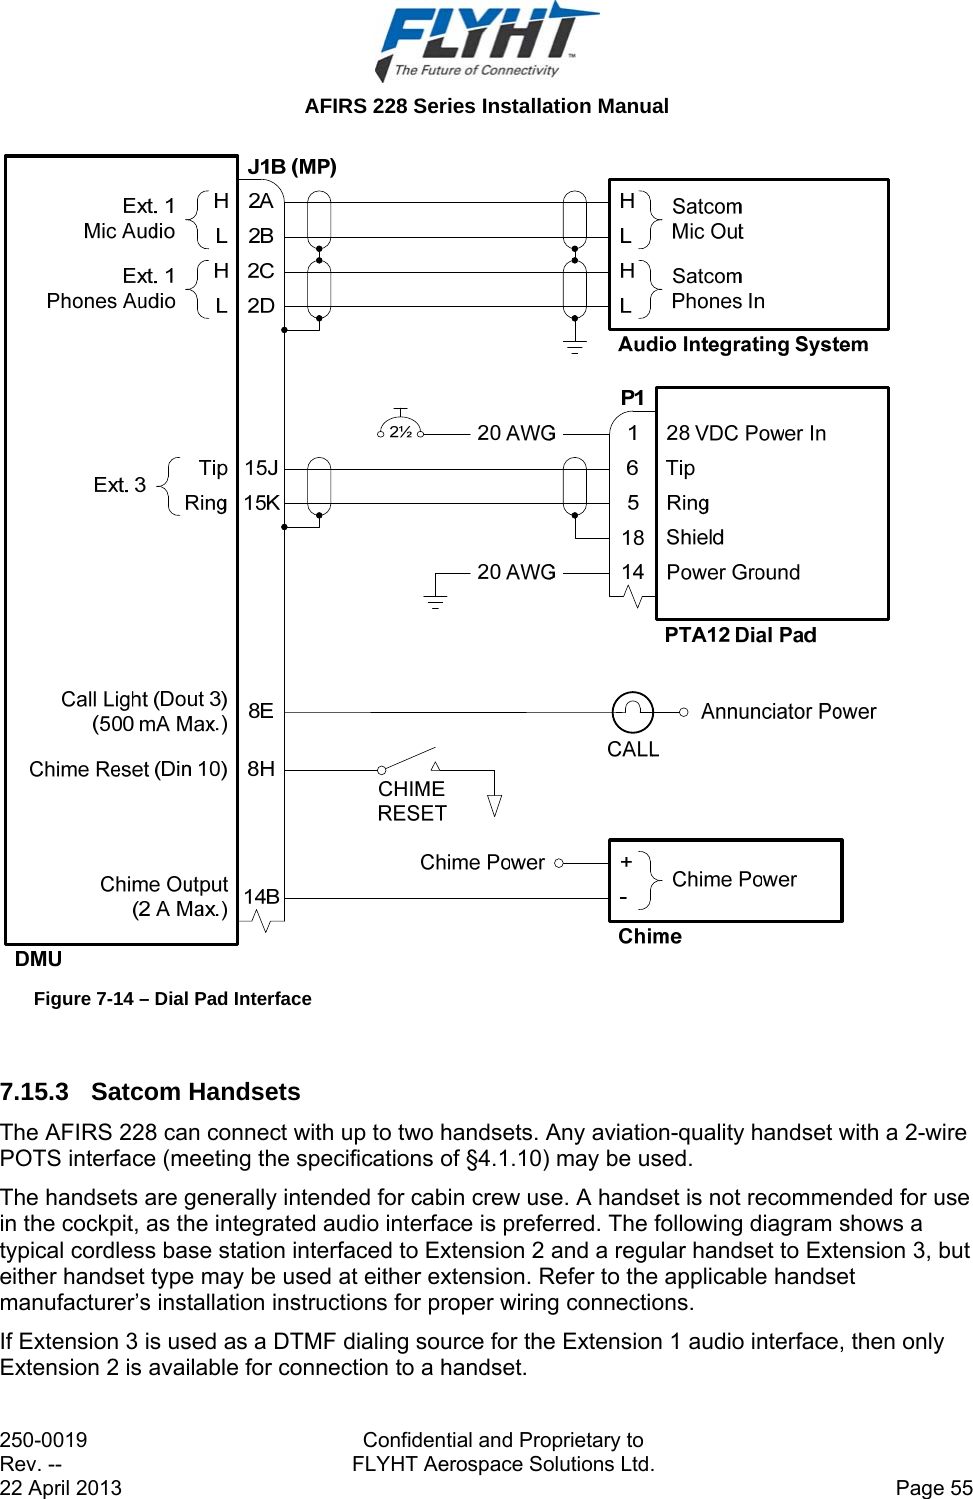  AFIRS 228 Series Installation Manual 250-0019  Confidential and Proprietary to Rev. --  FLYHT Aerospace Solutions Ltd. 22 April 2013    Page 55  Figure 7-14 – Dial Pad Interface  7.15.3 Satcom Handsets The AFIRS 228 can connect with up to two handsets. Any aviation-quality handset with a 2-wire POTS interface (meeting the specifications of §4.1.10) may be used. The handsets are generally intended for cabin crew use. A handset is not recommended for use in the cockpit, as the integrated audio interface is preferred. The following diagram shows a typical cordless base station interfaced to Extension 2 and a regular handset to Extension 3, but either handset type may be used at either extension. Refer to the applicable handset manufacturer’s installation instructions for proper wiring connections. If Extension 3 is used as a DTMF dialing source for the Extension 1 audio interface, then only Extension 2 is available for connection to a handset. 